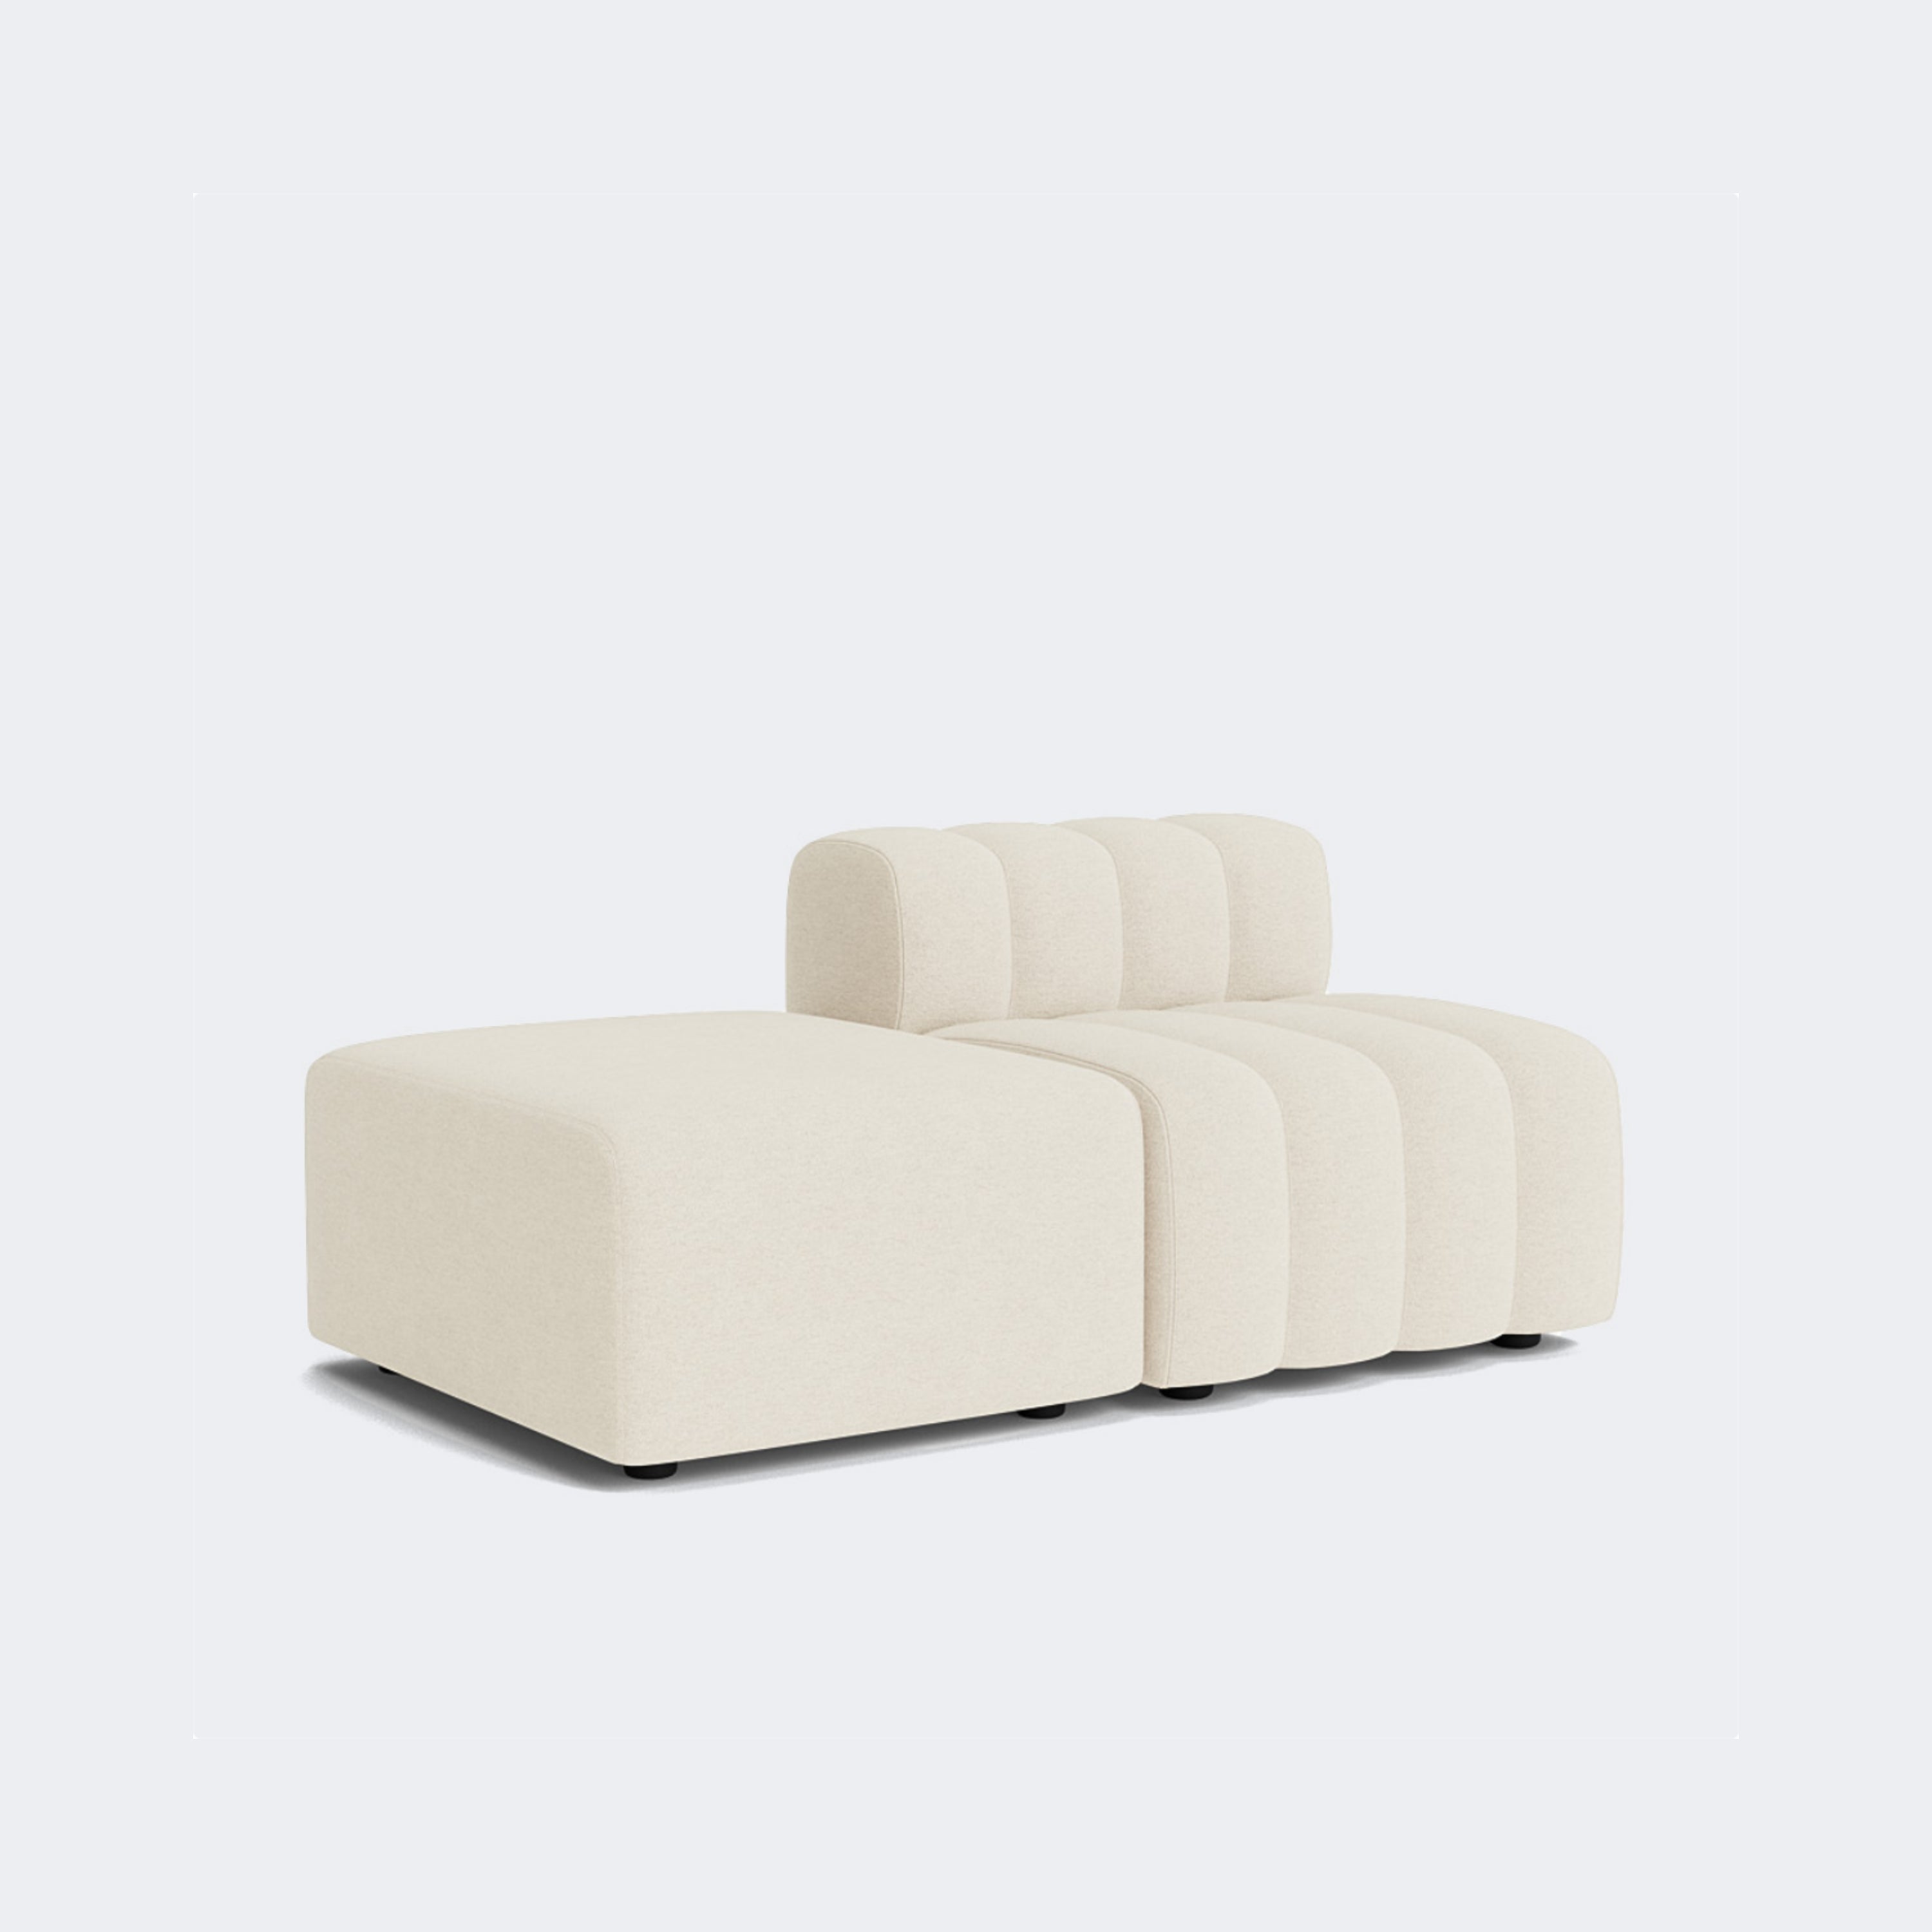 Norr11 Studio 2 Made To Order (8-10 Weeks) Barnum Col 24 - KANSO#Upholstery_Barnum Col 24